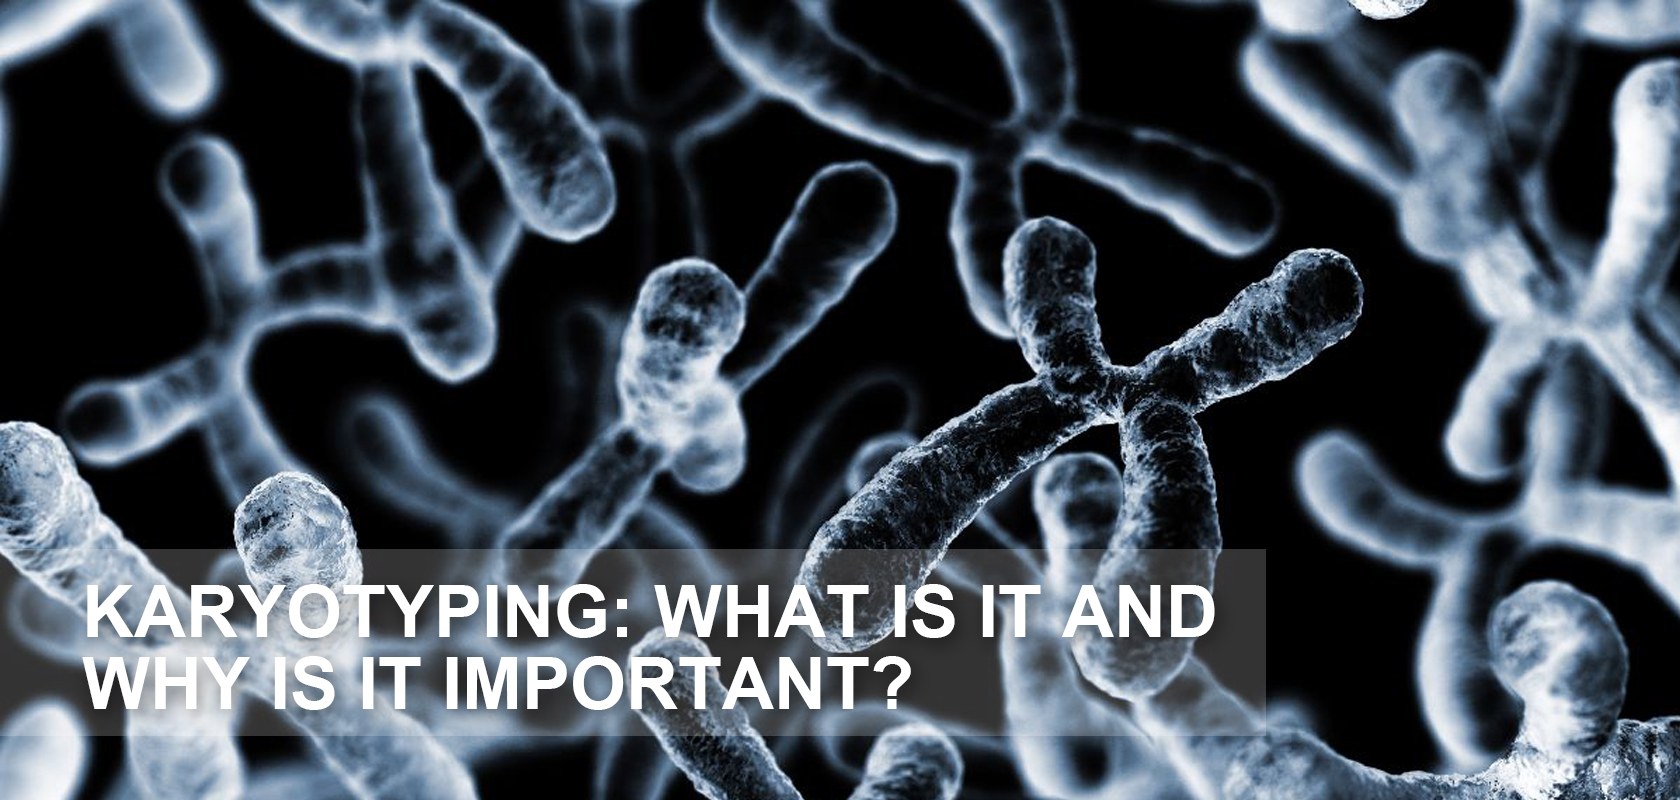 KARYOTYPING: WHAT IS IT AND WHY IS IT IMPORTANT?